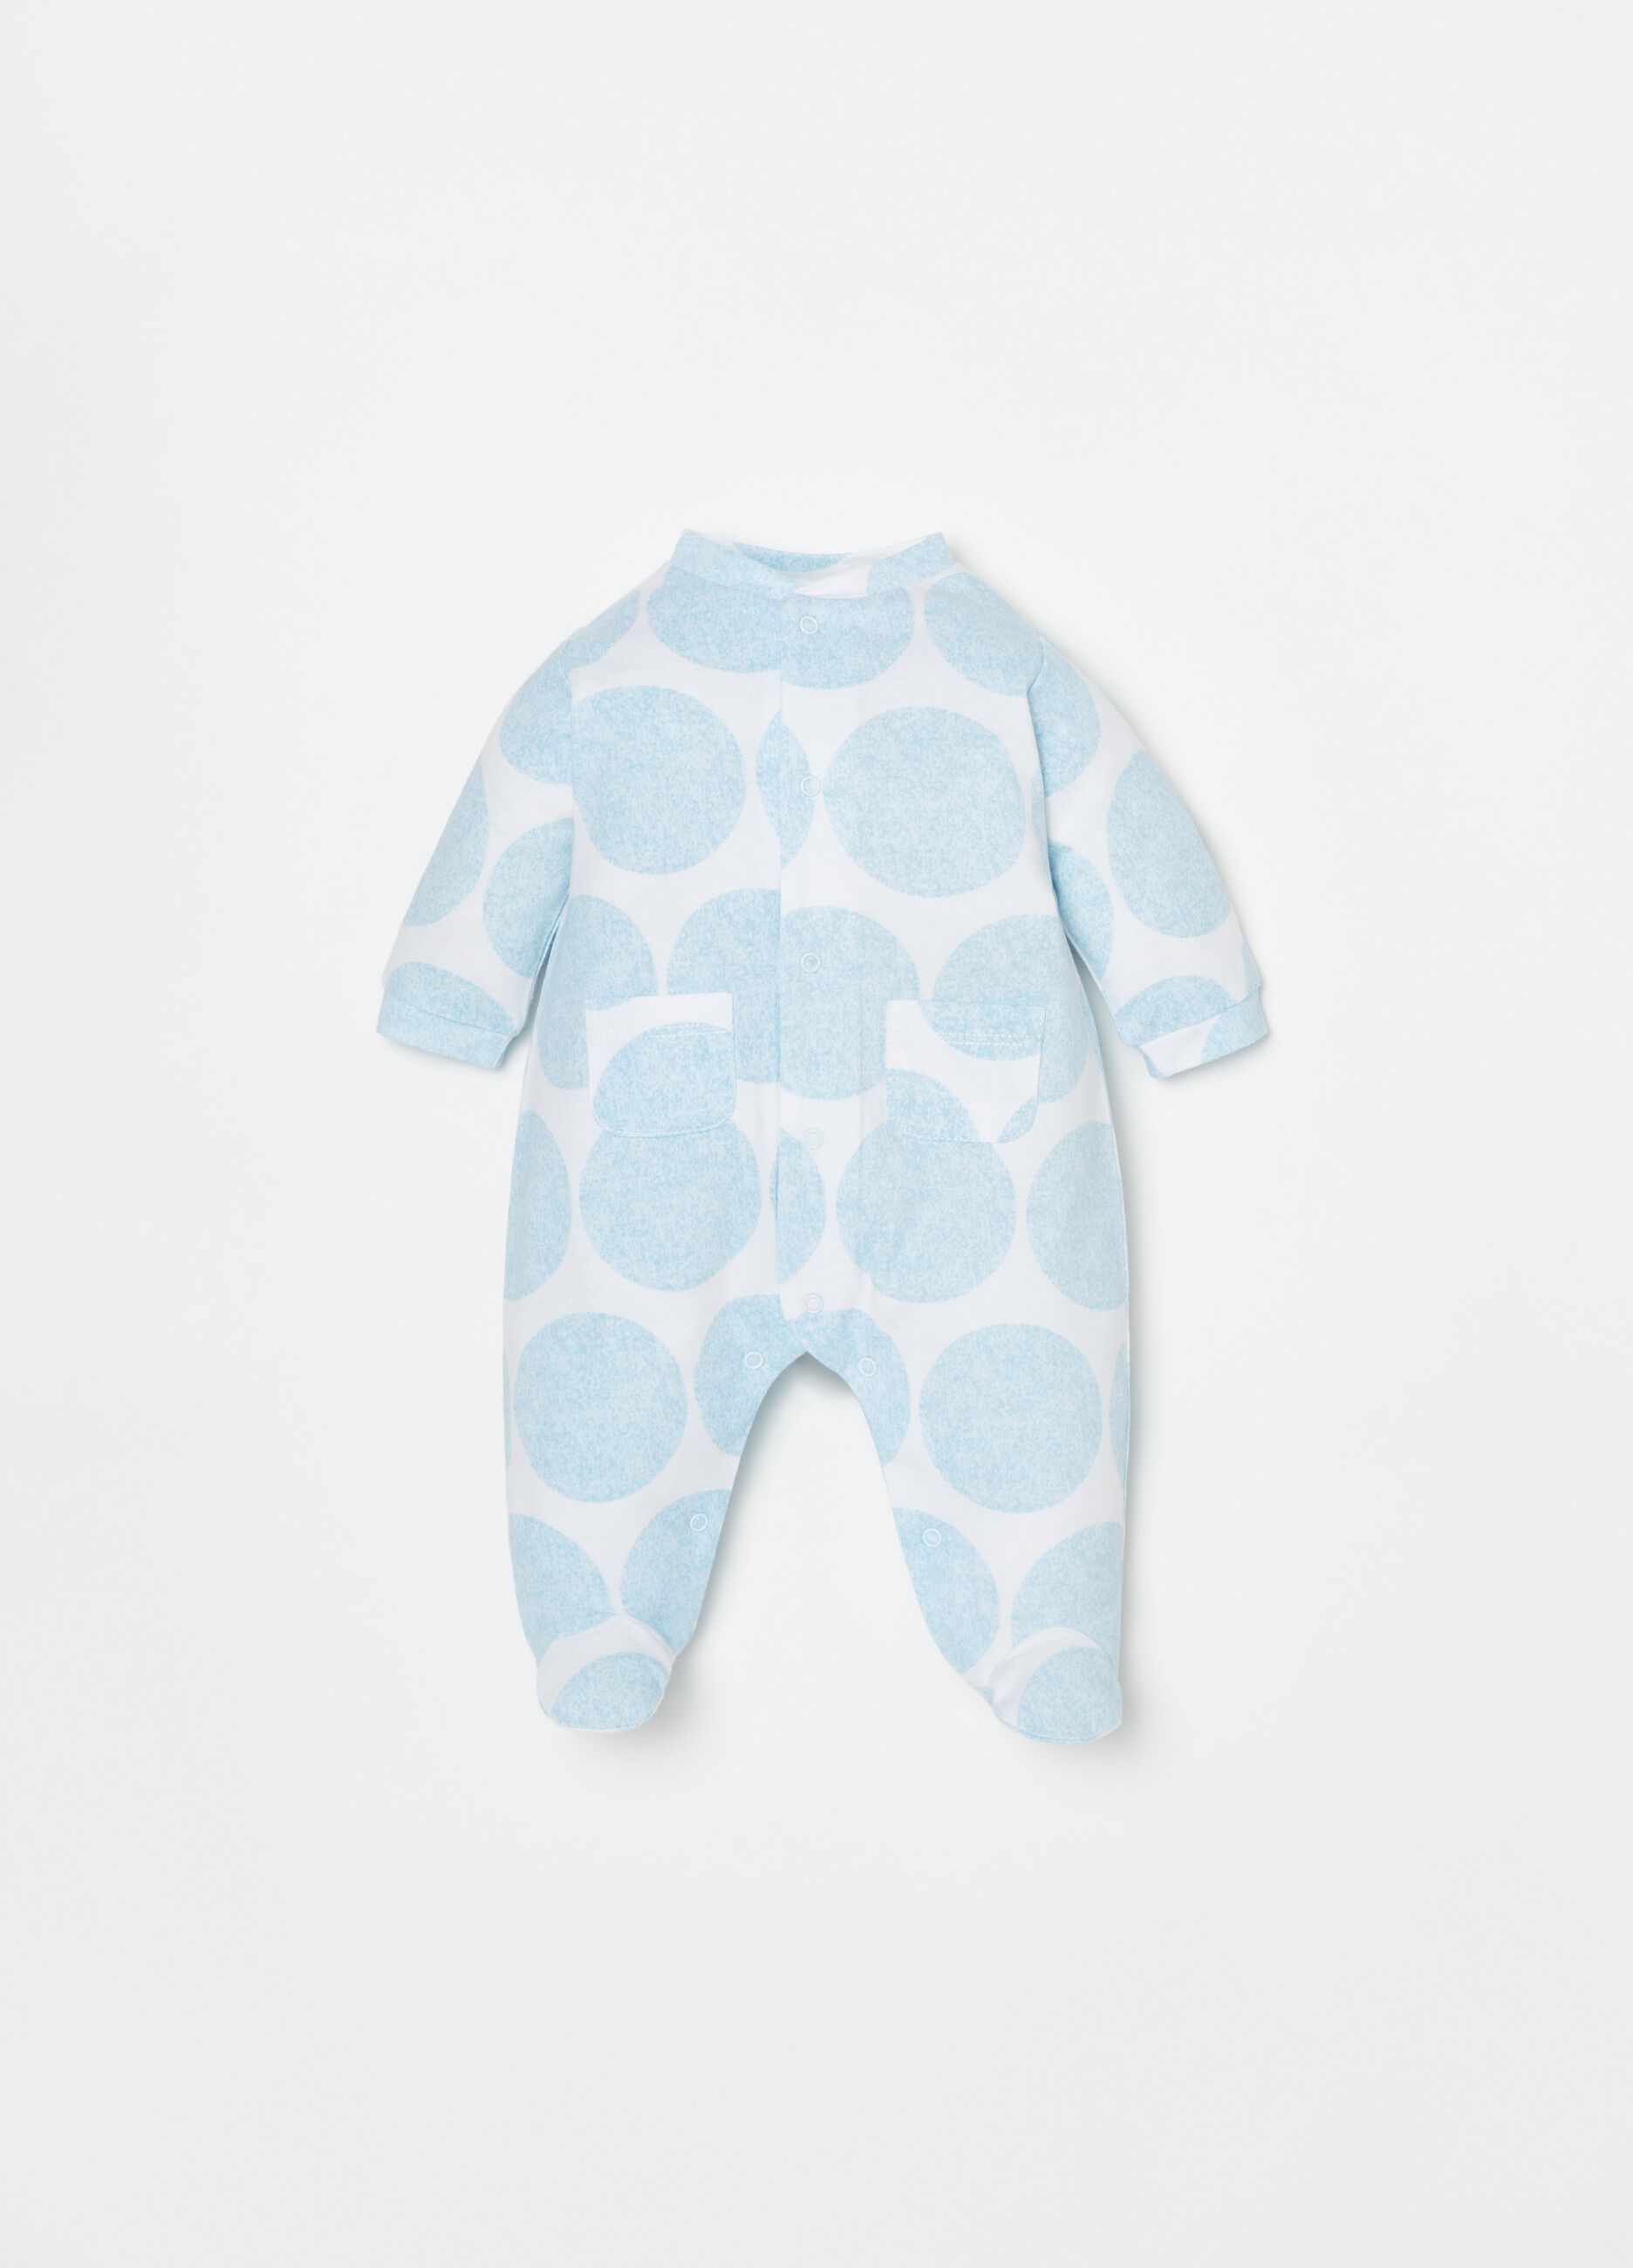 Cotton onesie with feet and maxi polka dots pattern